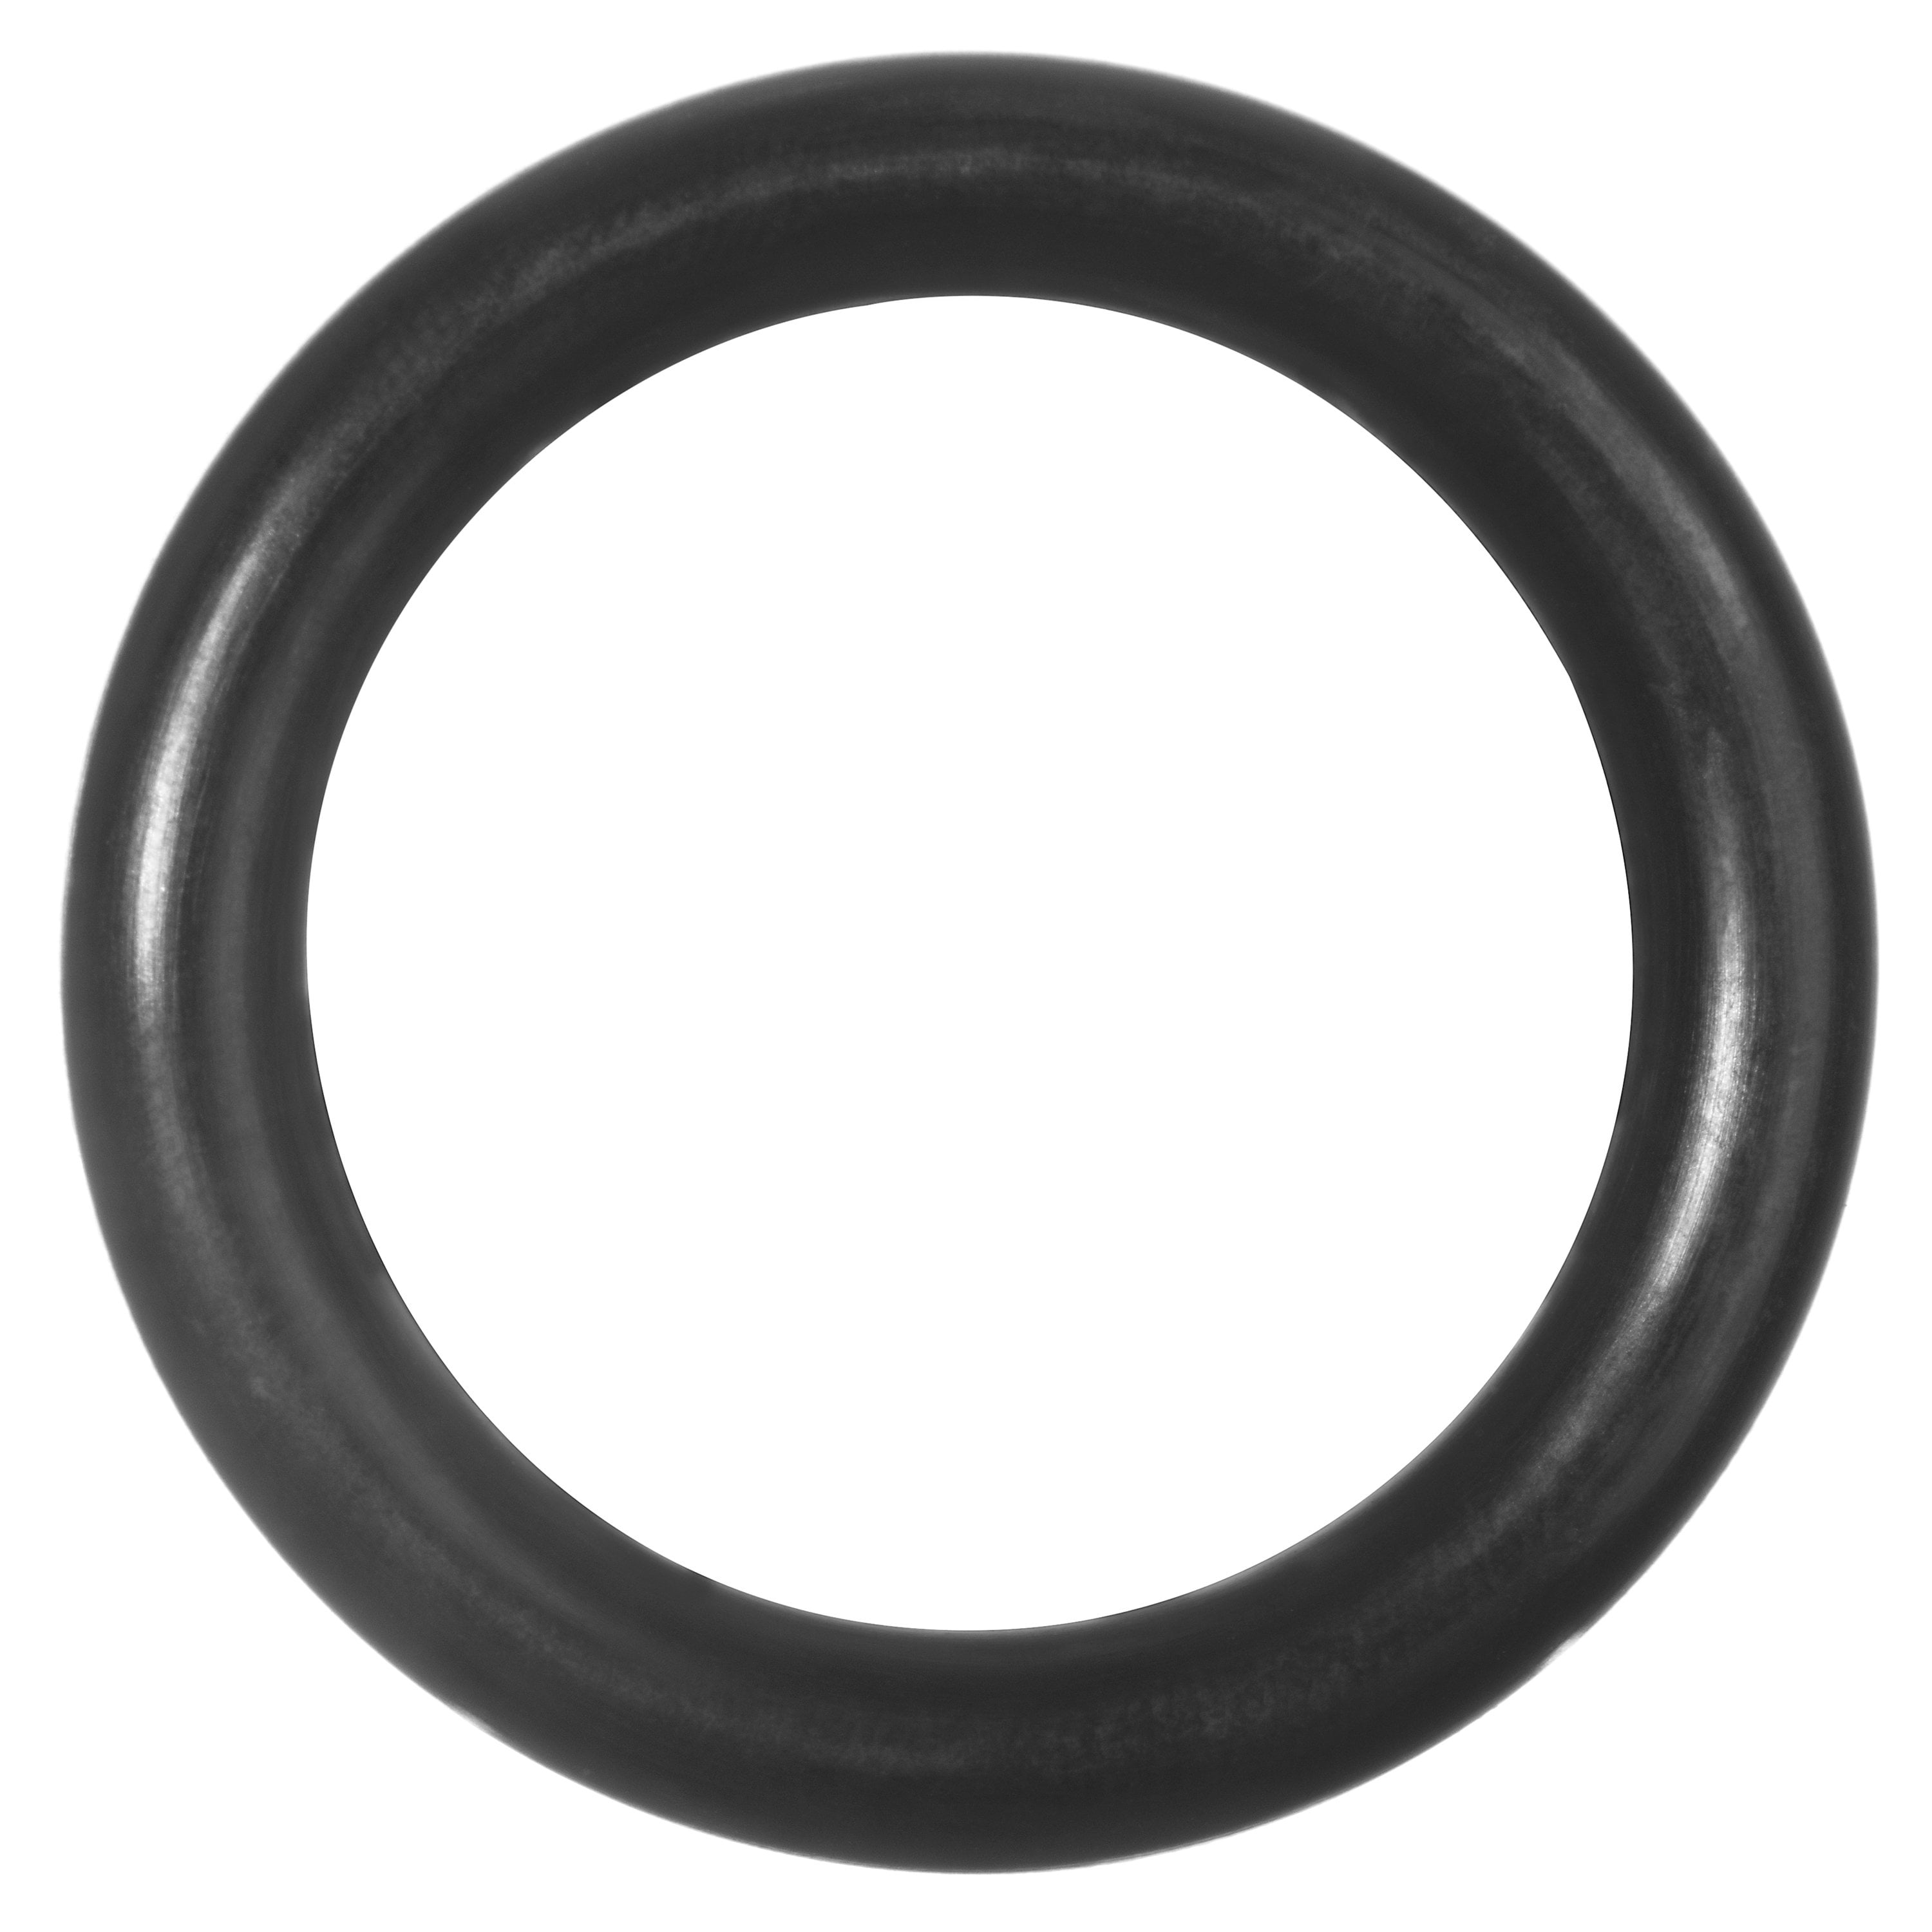 Viton Heat Resistant Black O-rings  Size 430 Price for 1 pc 